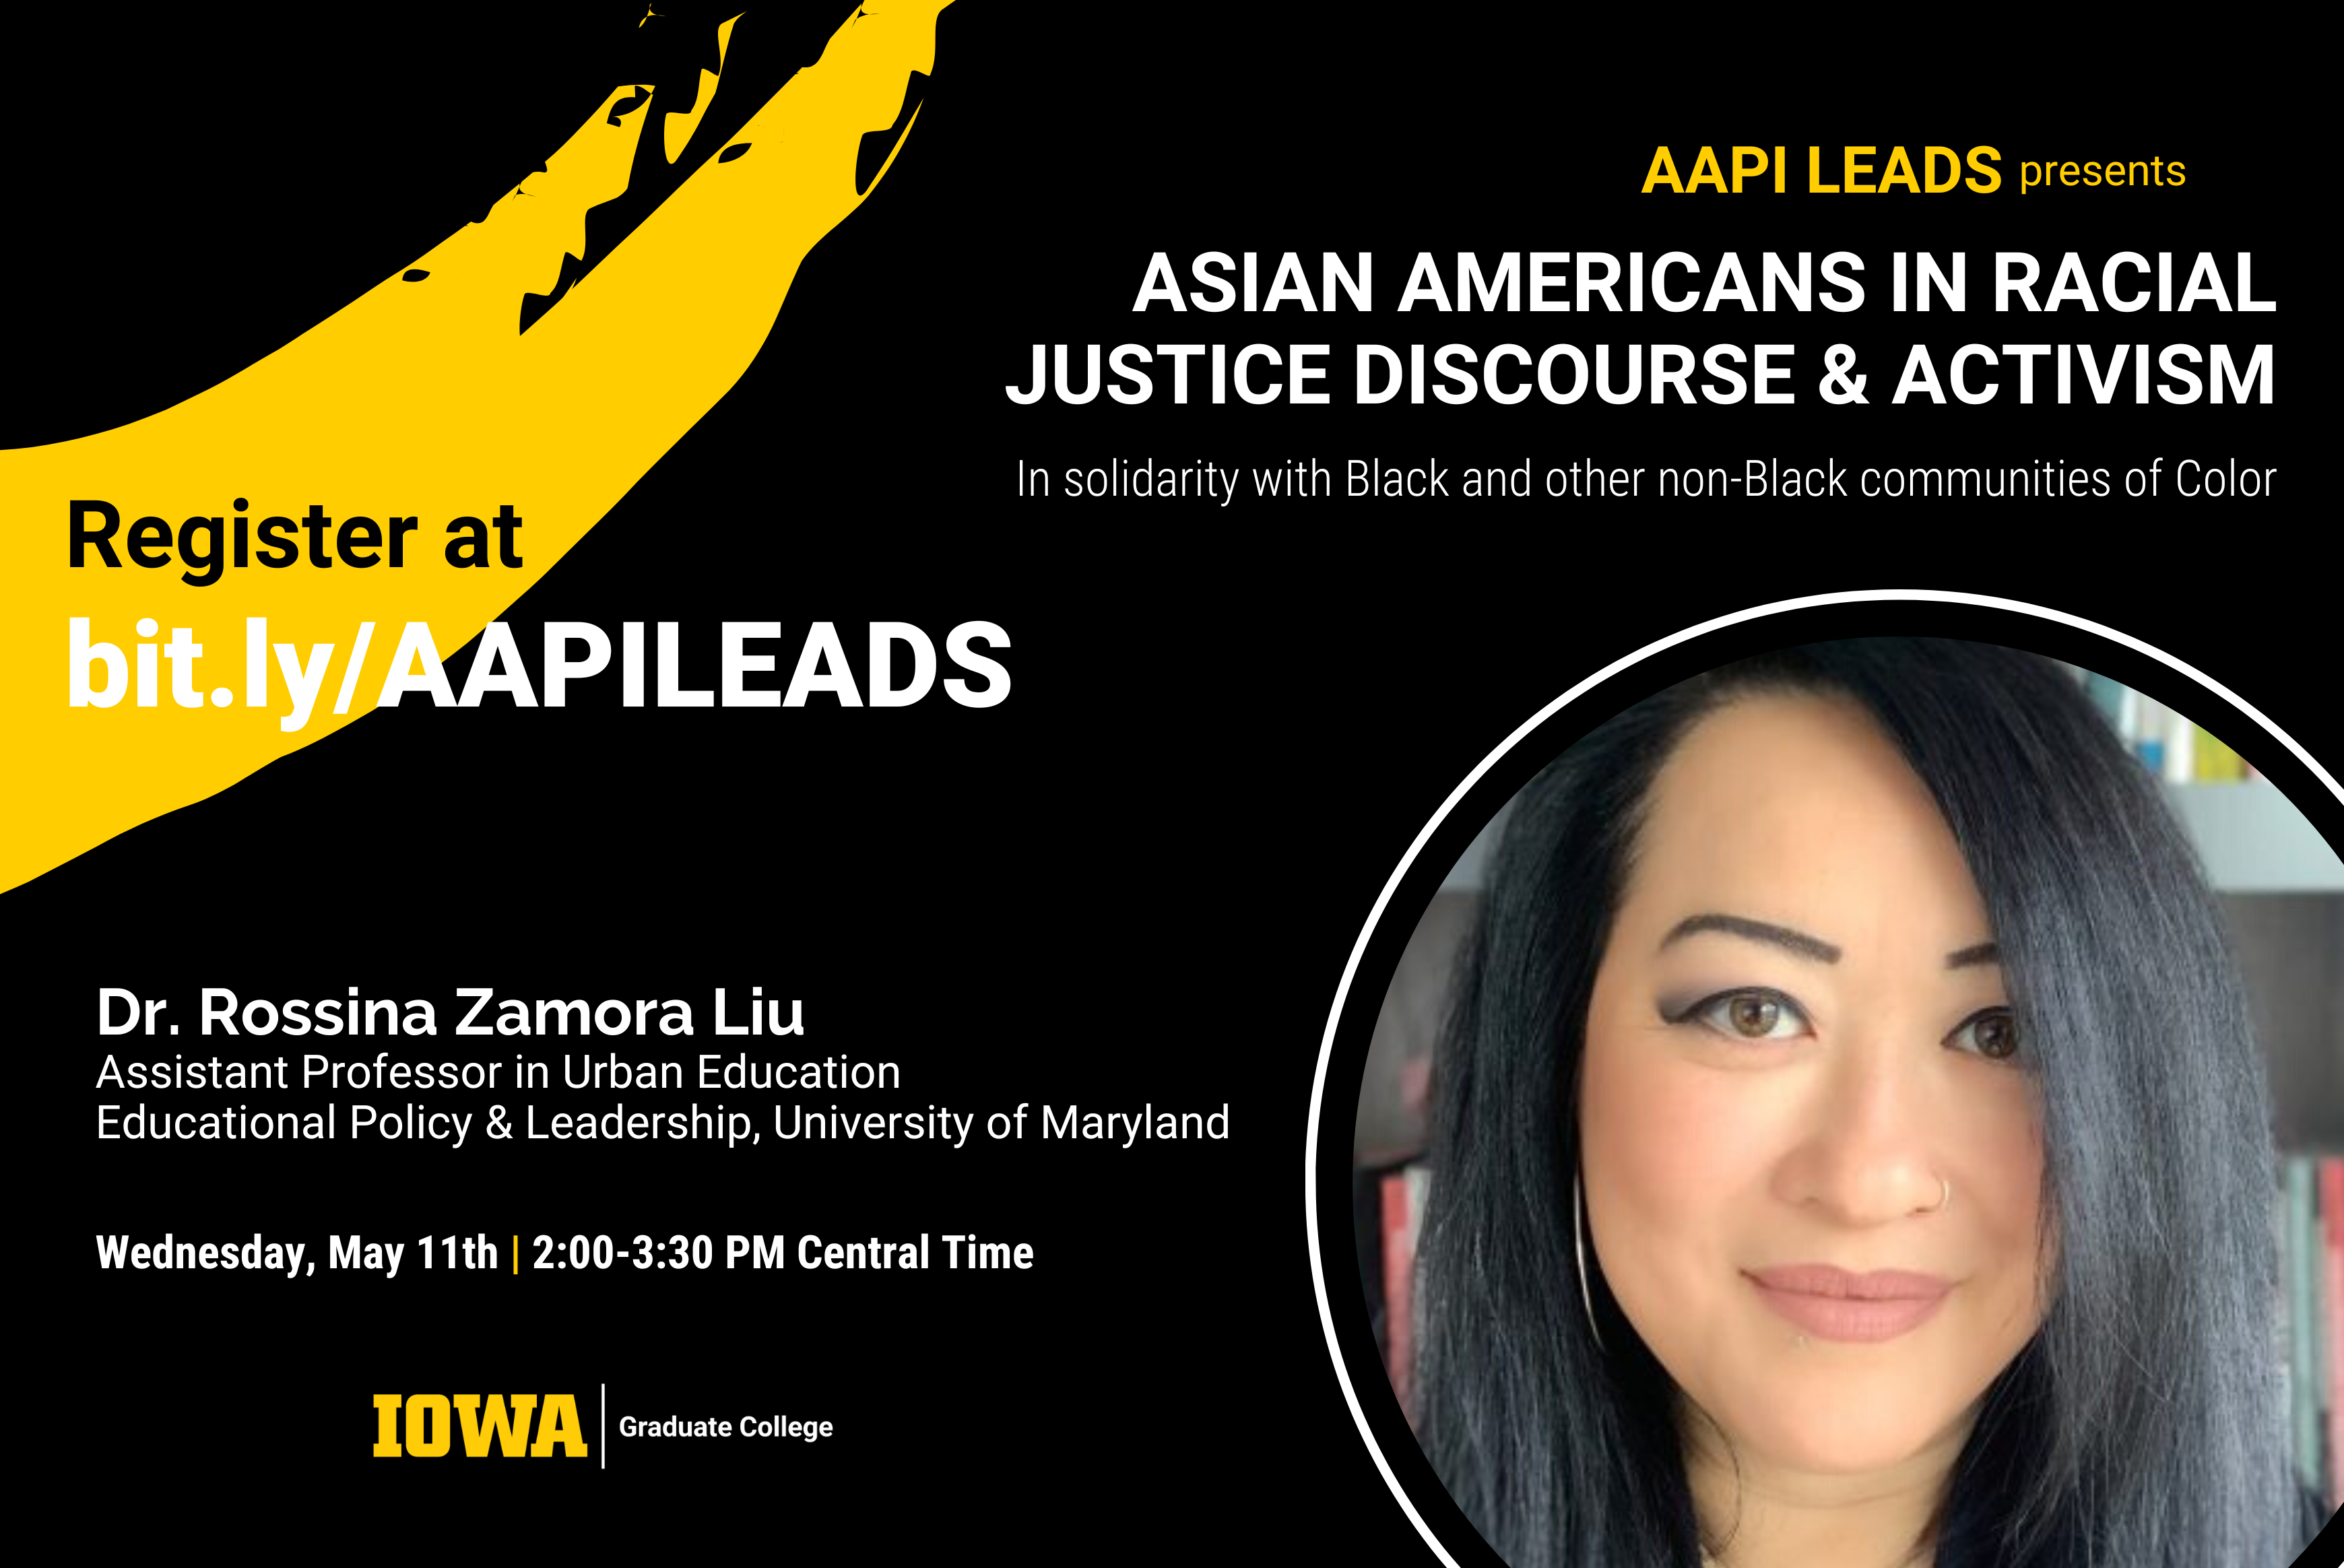 AAPI LEADS: Asian Americans in Racial Justice Discourse and Activism promotional image